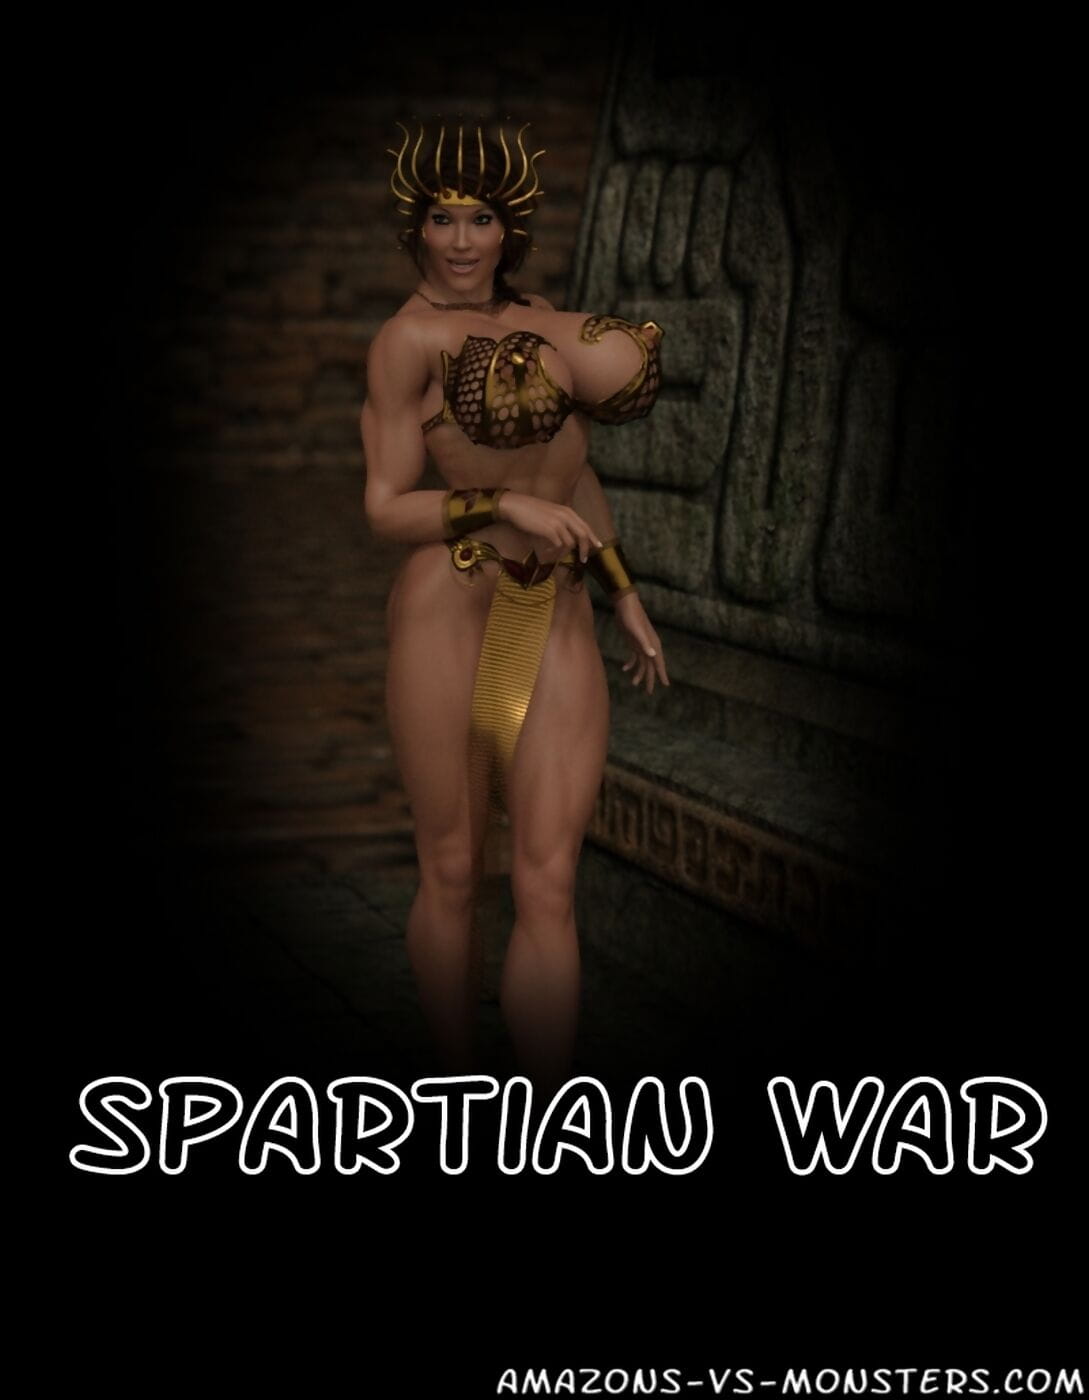 Amazons and Monsters- Spartian War page 1